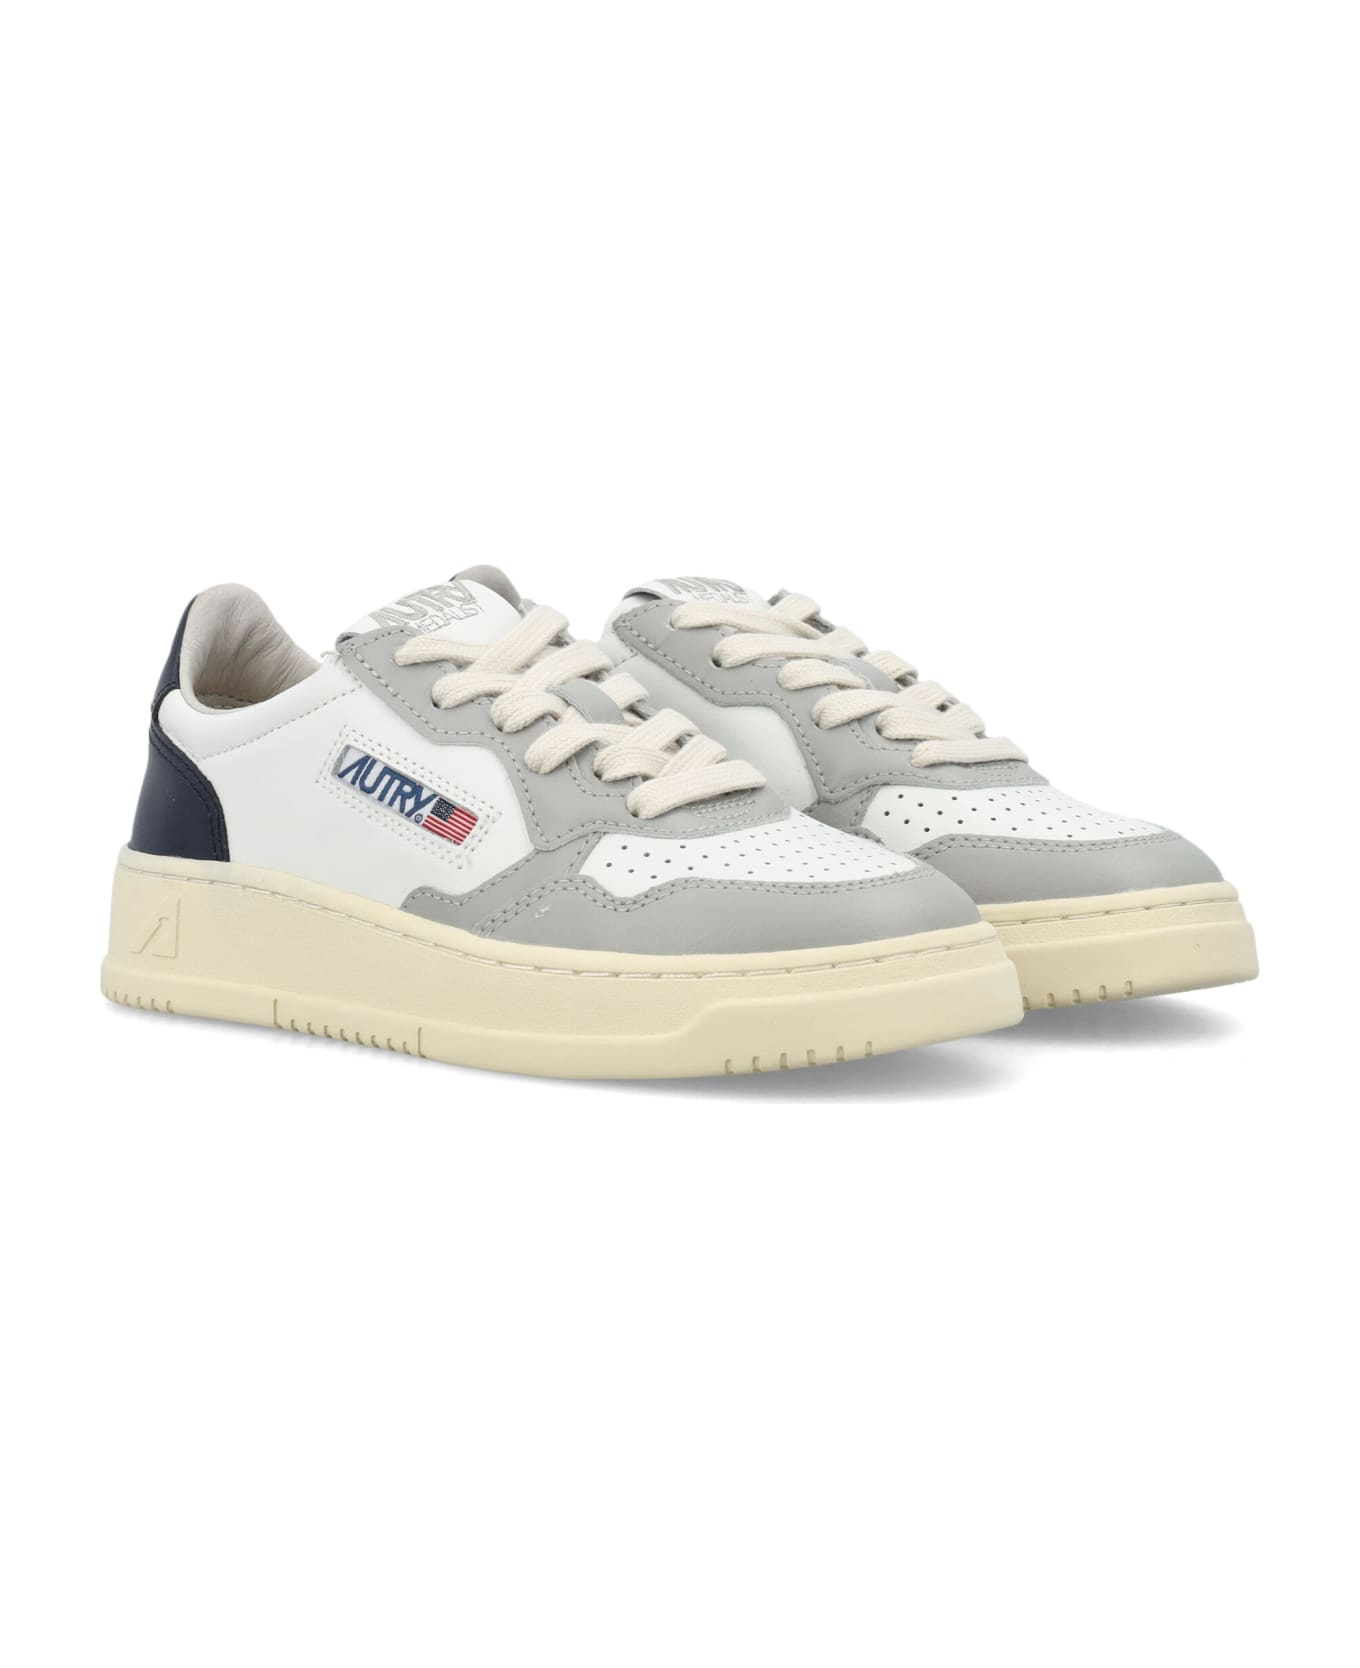 Autry Medalist Low Sneakers - WHITE GREY BLUE シューズ